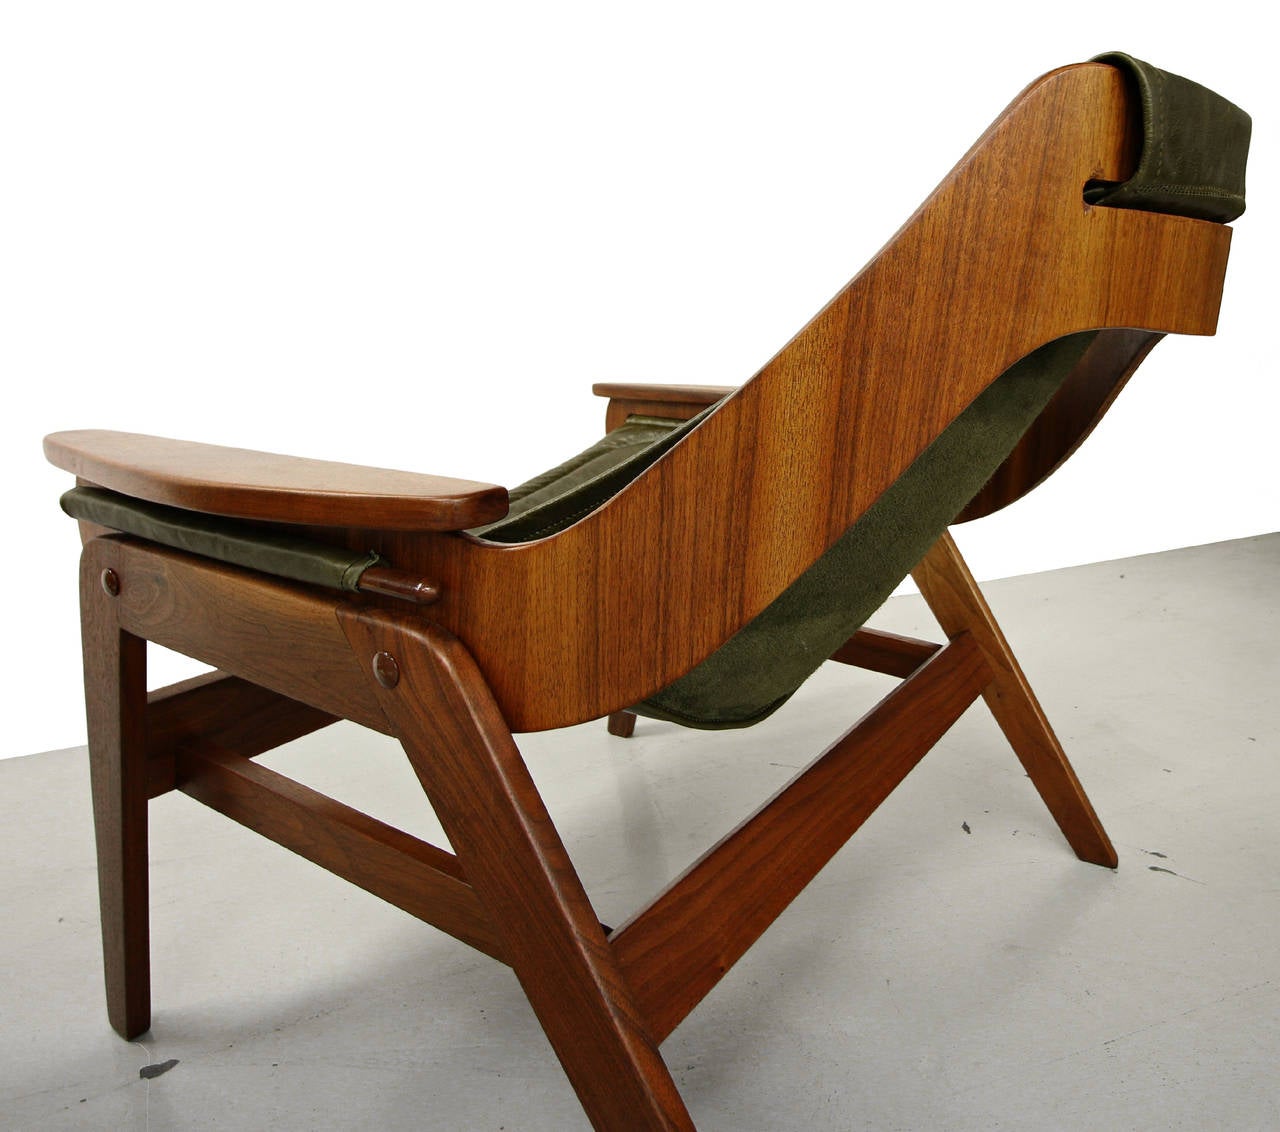 20th Century Pair of Midcentury Walnut and Leather Sling Chairs by Jerry Johnson